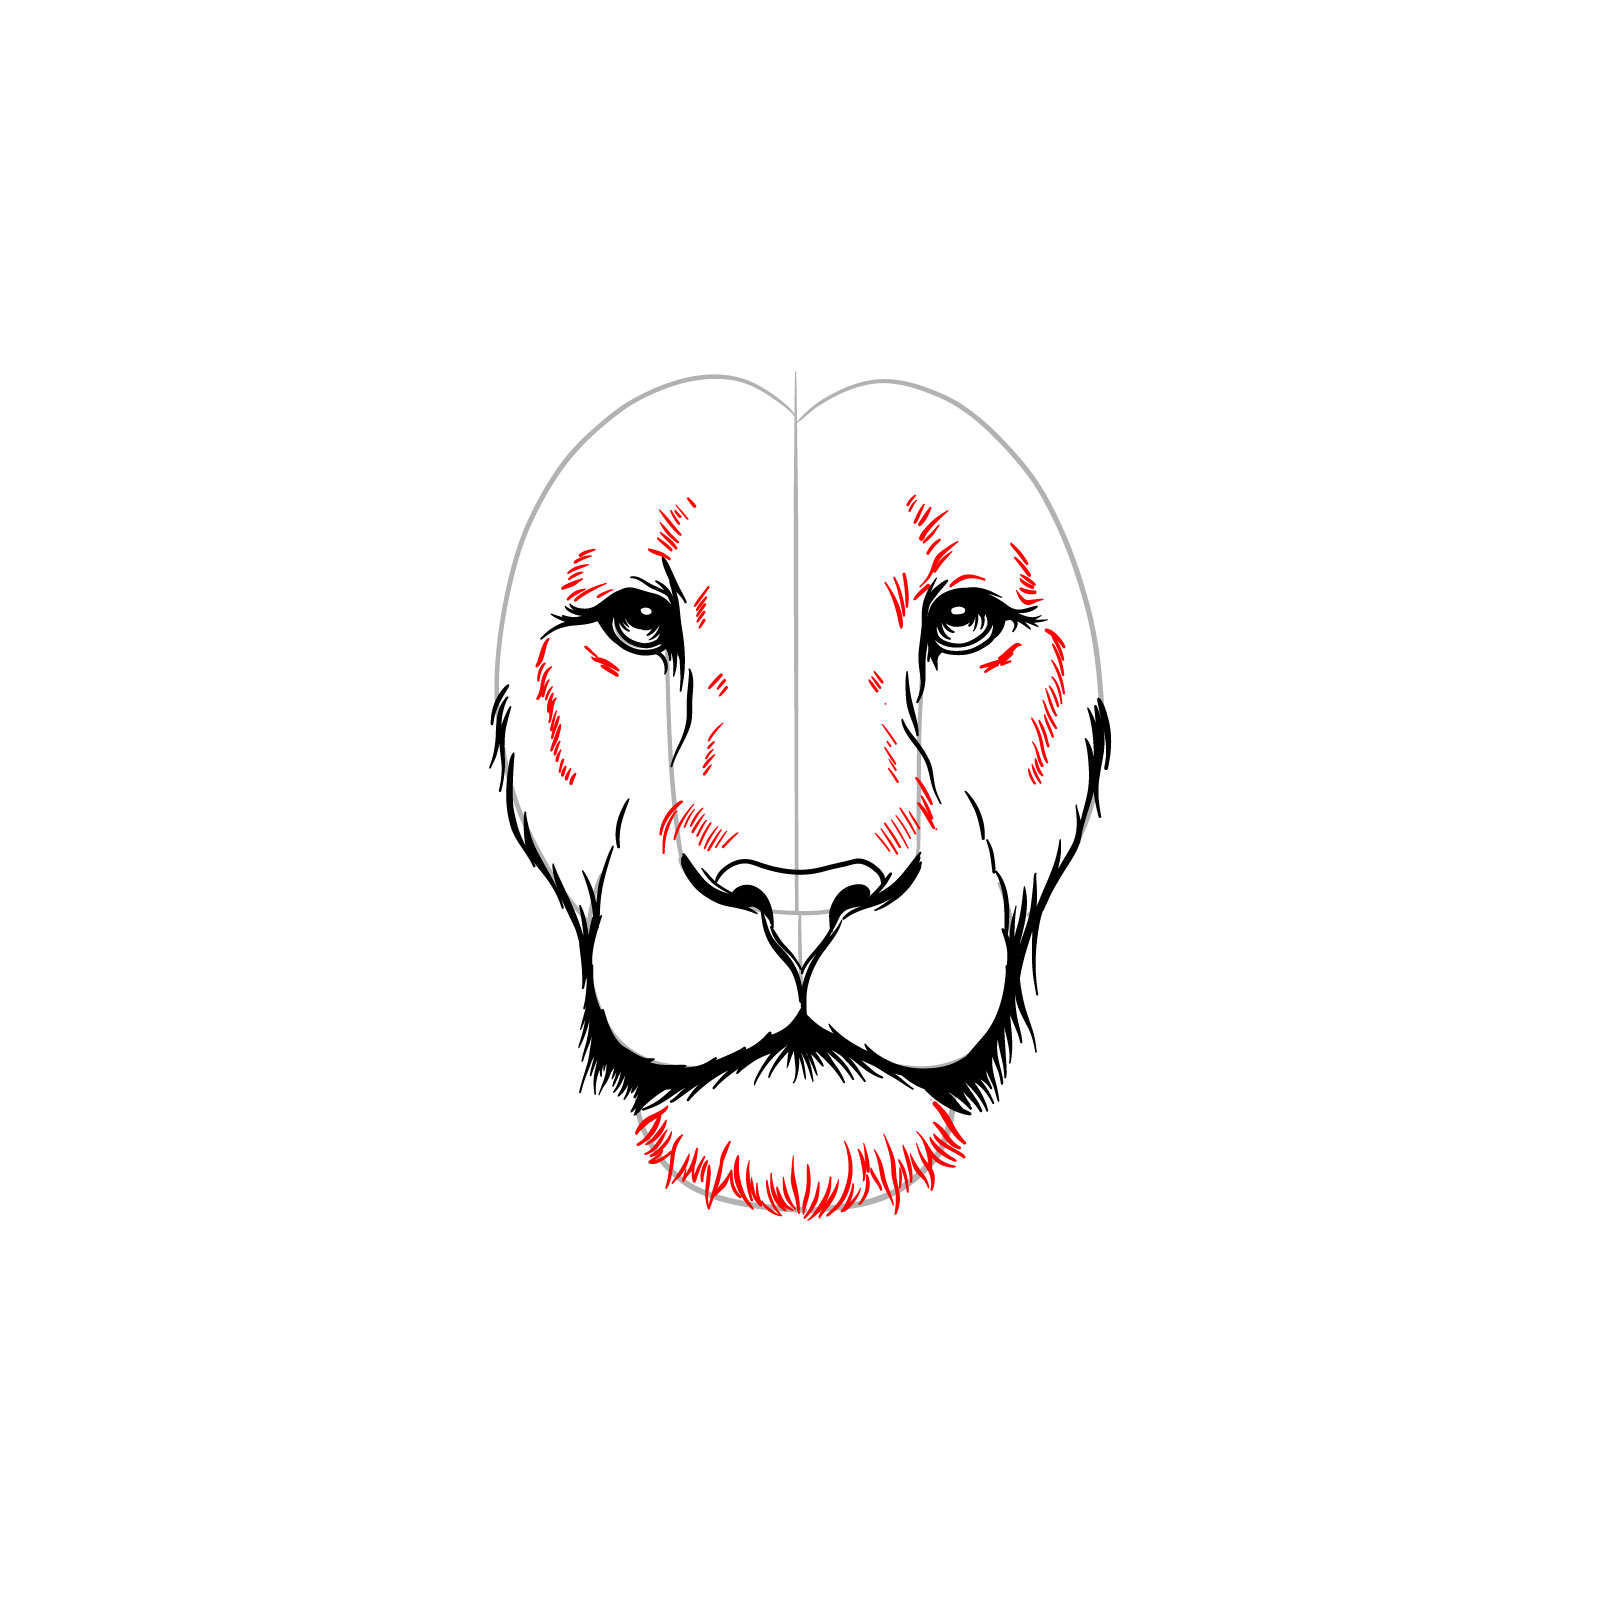 Adding chin details to a lion's face front view drawing - step 08